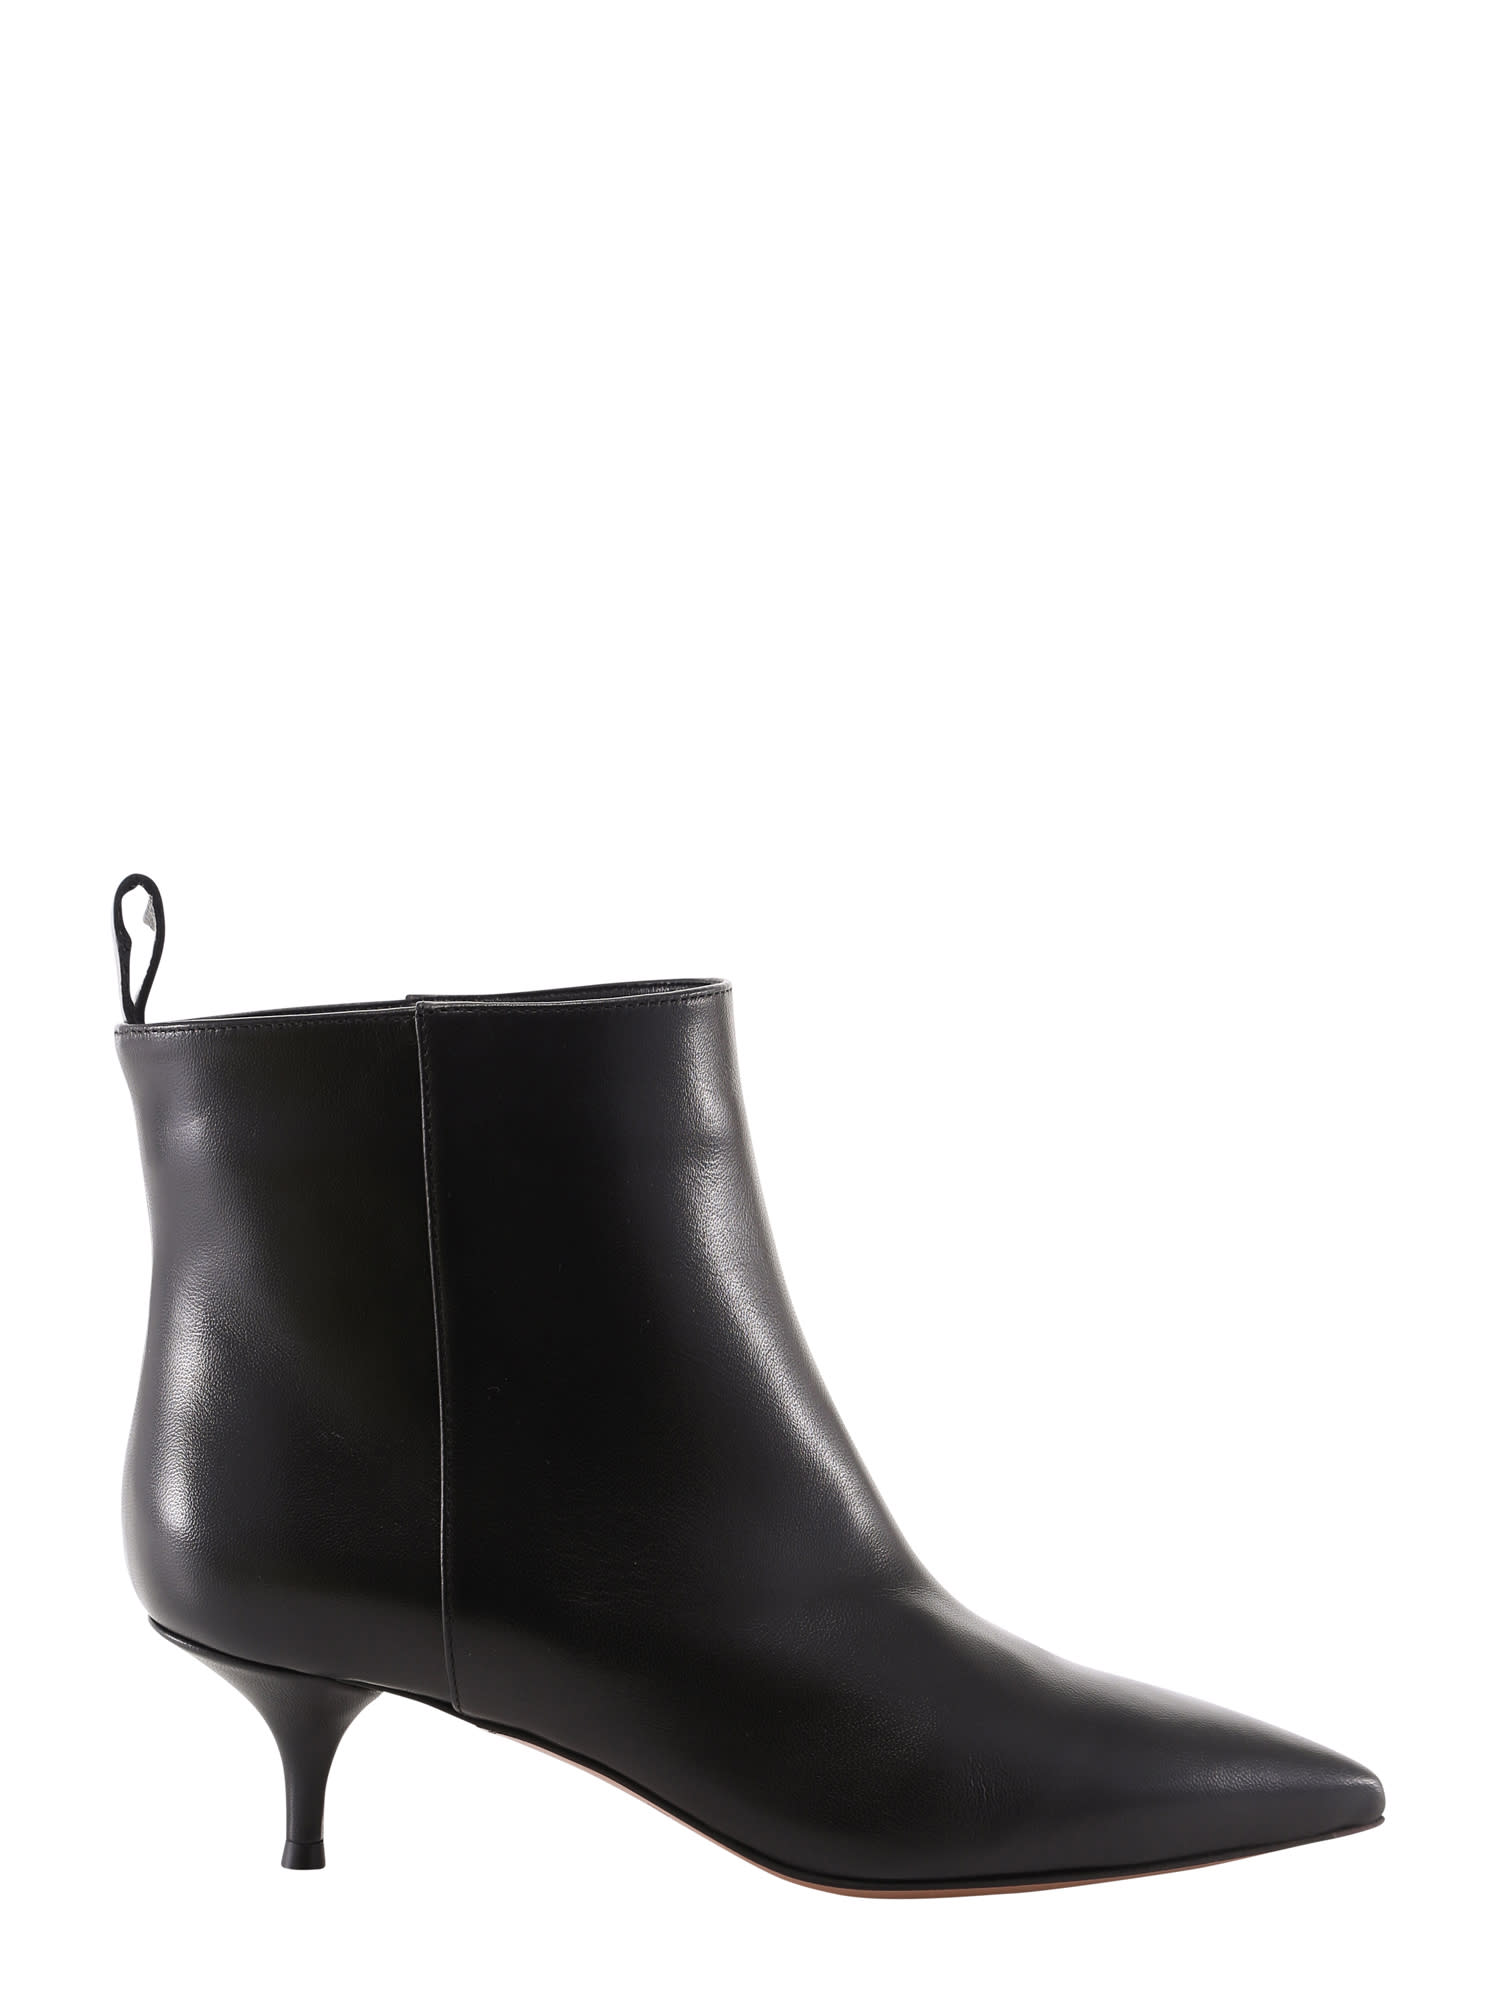 LAutre Chose Pointed Toe Boots